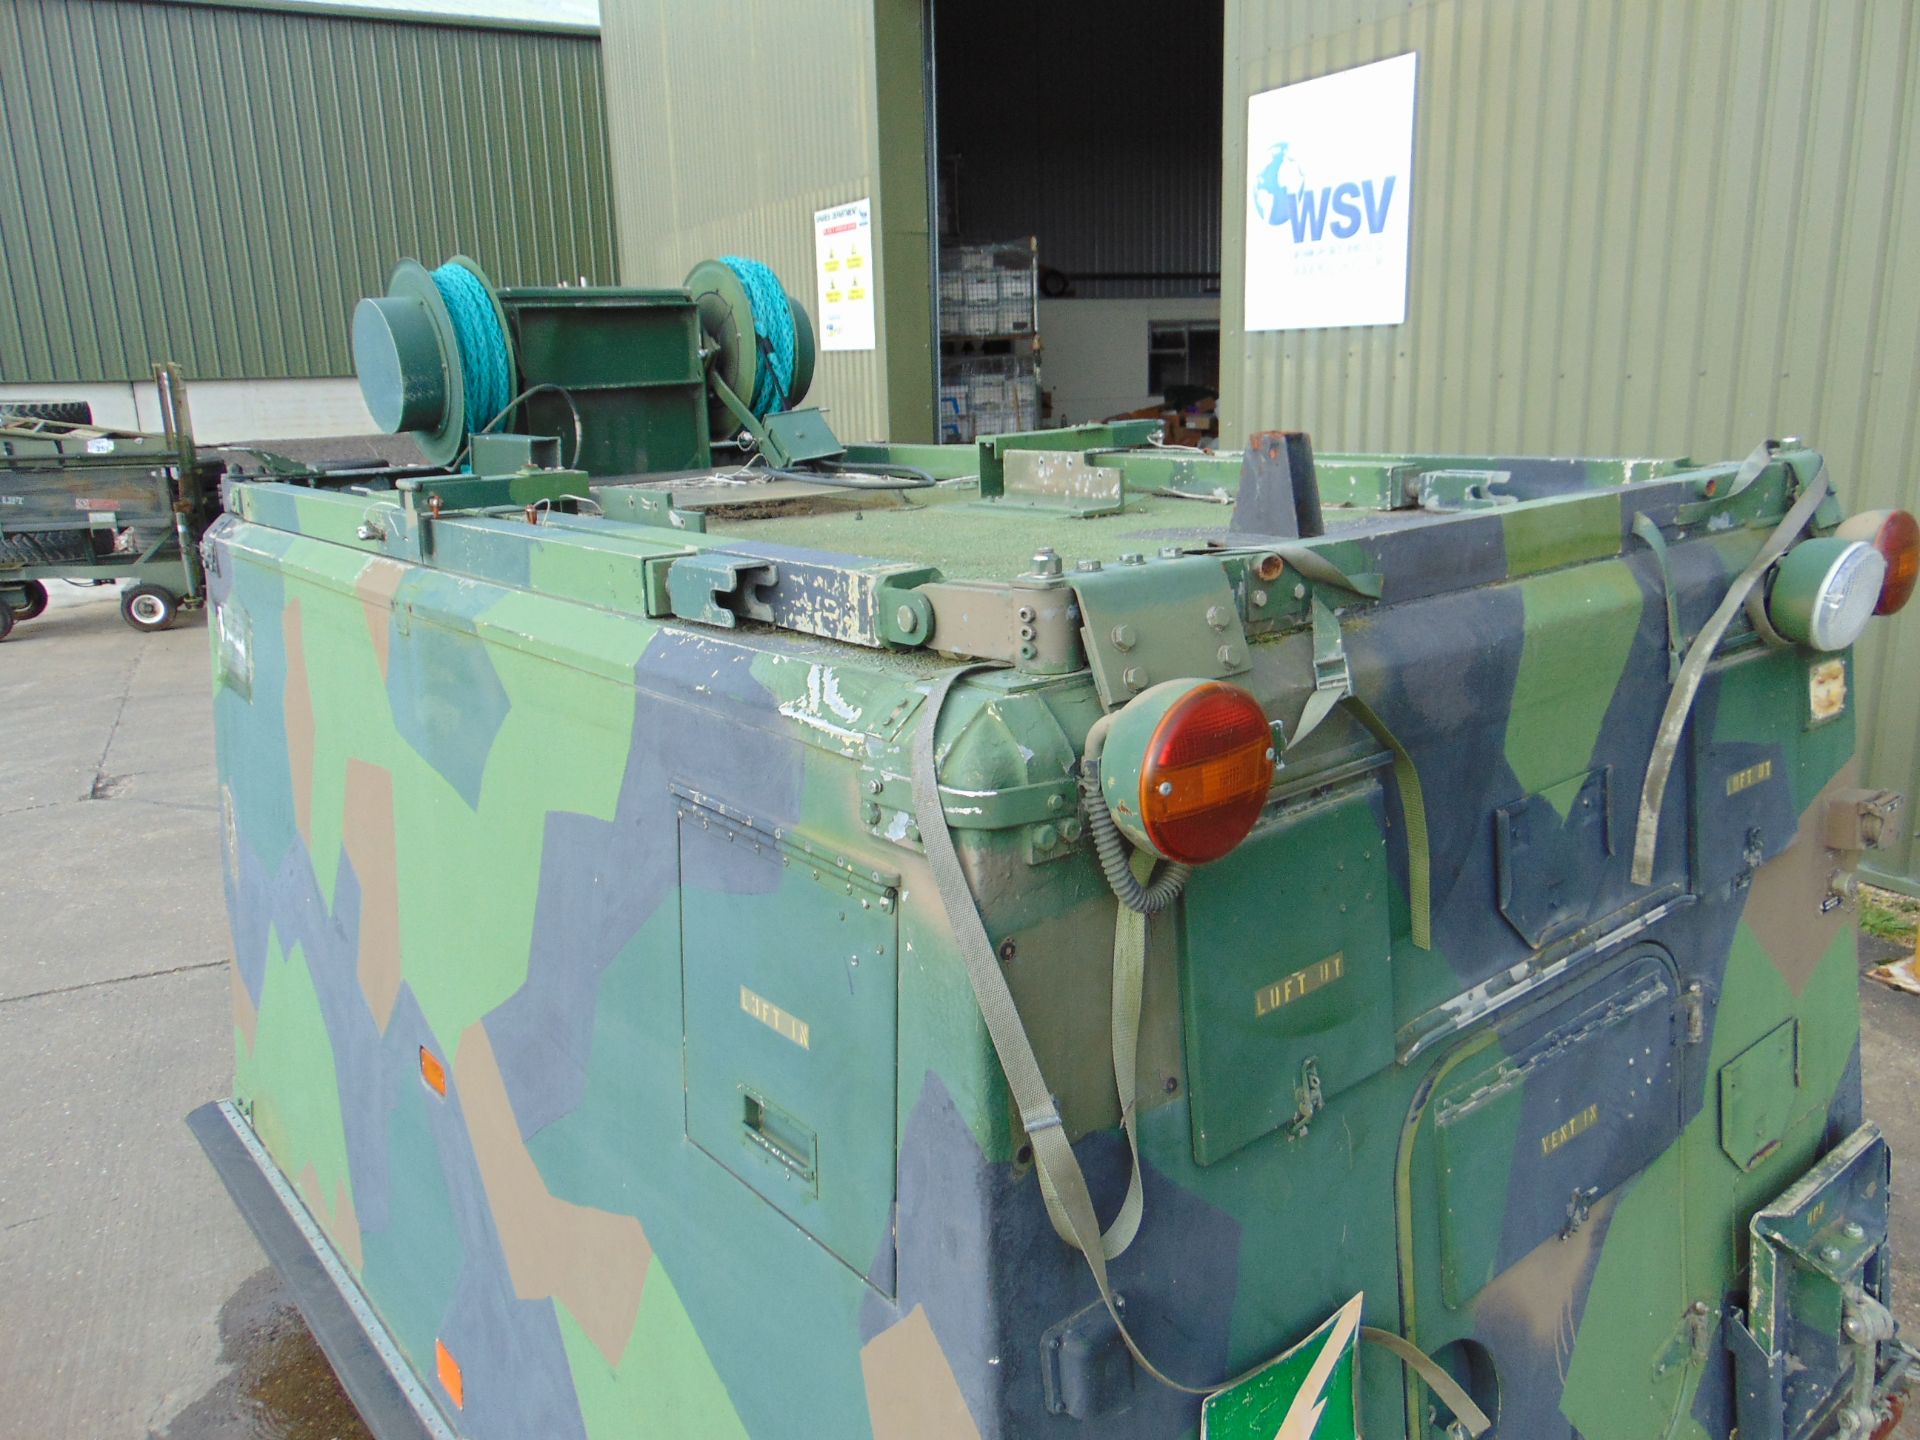 Hagglunds BV206 Radio Comminications Pod - Image 26 of 29